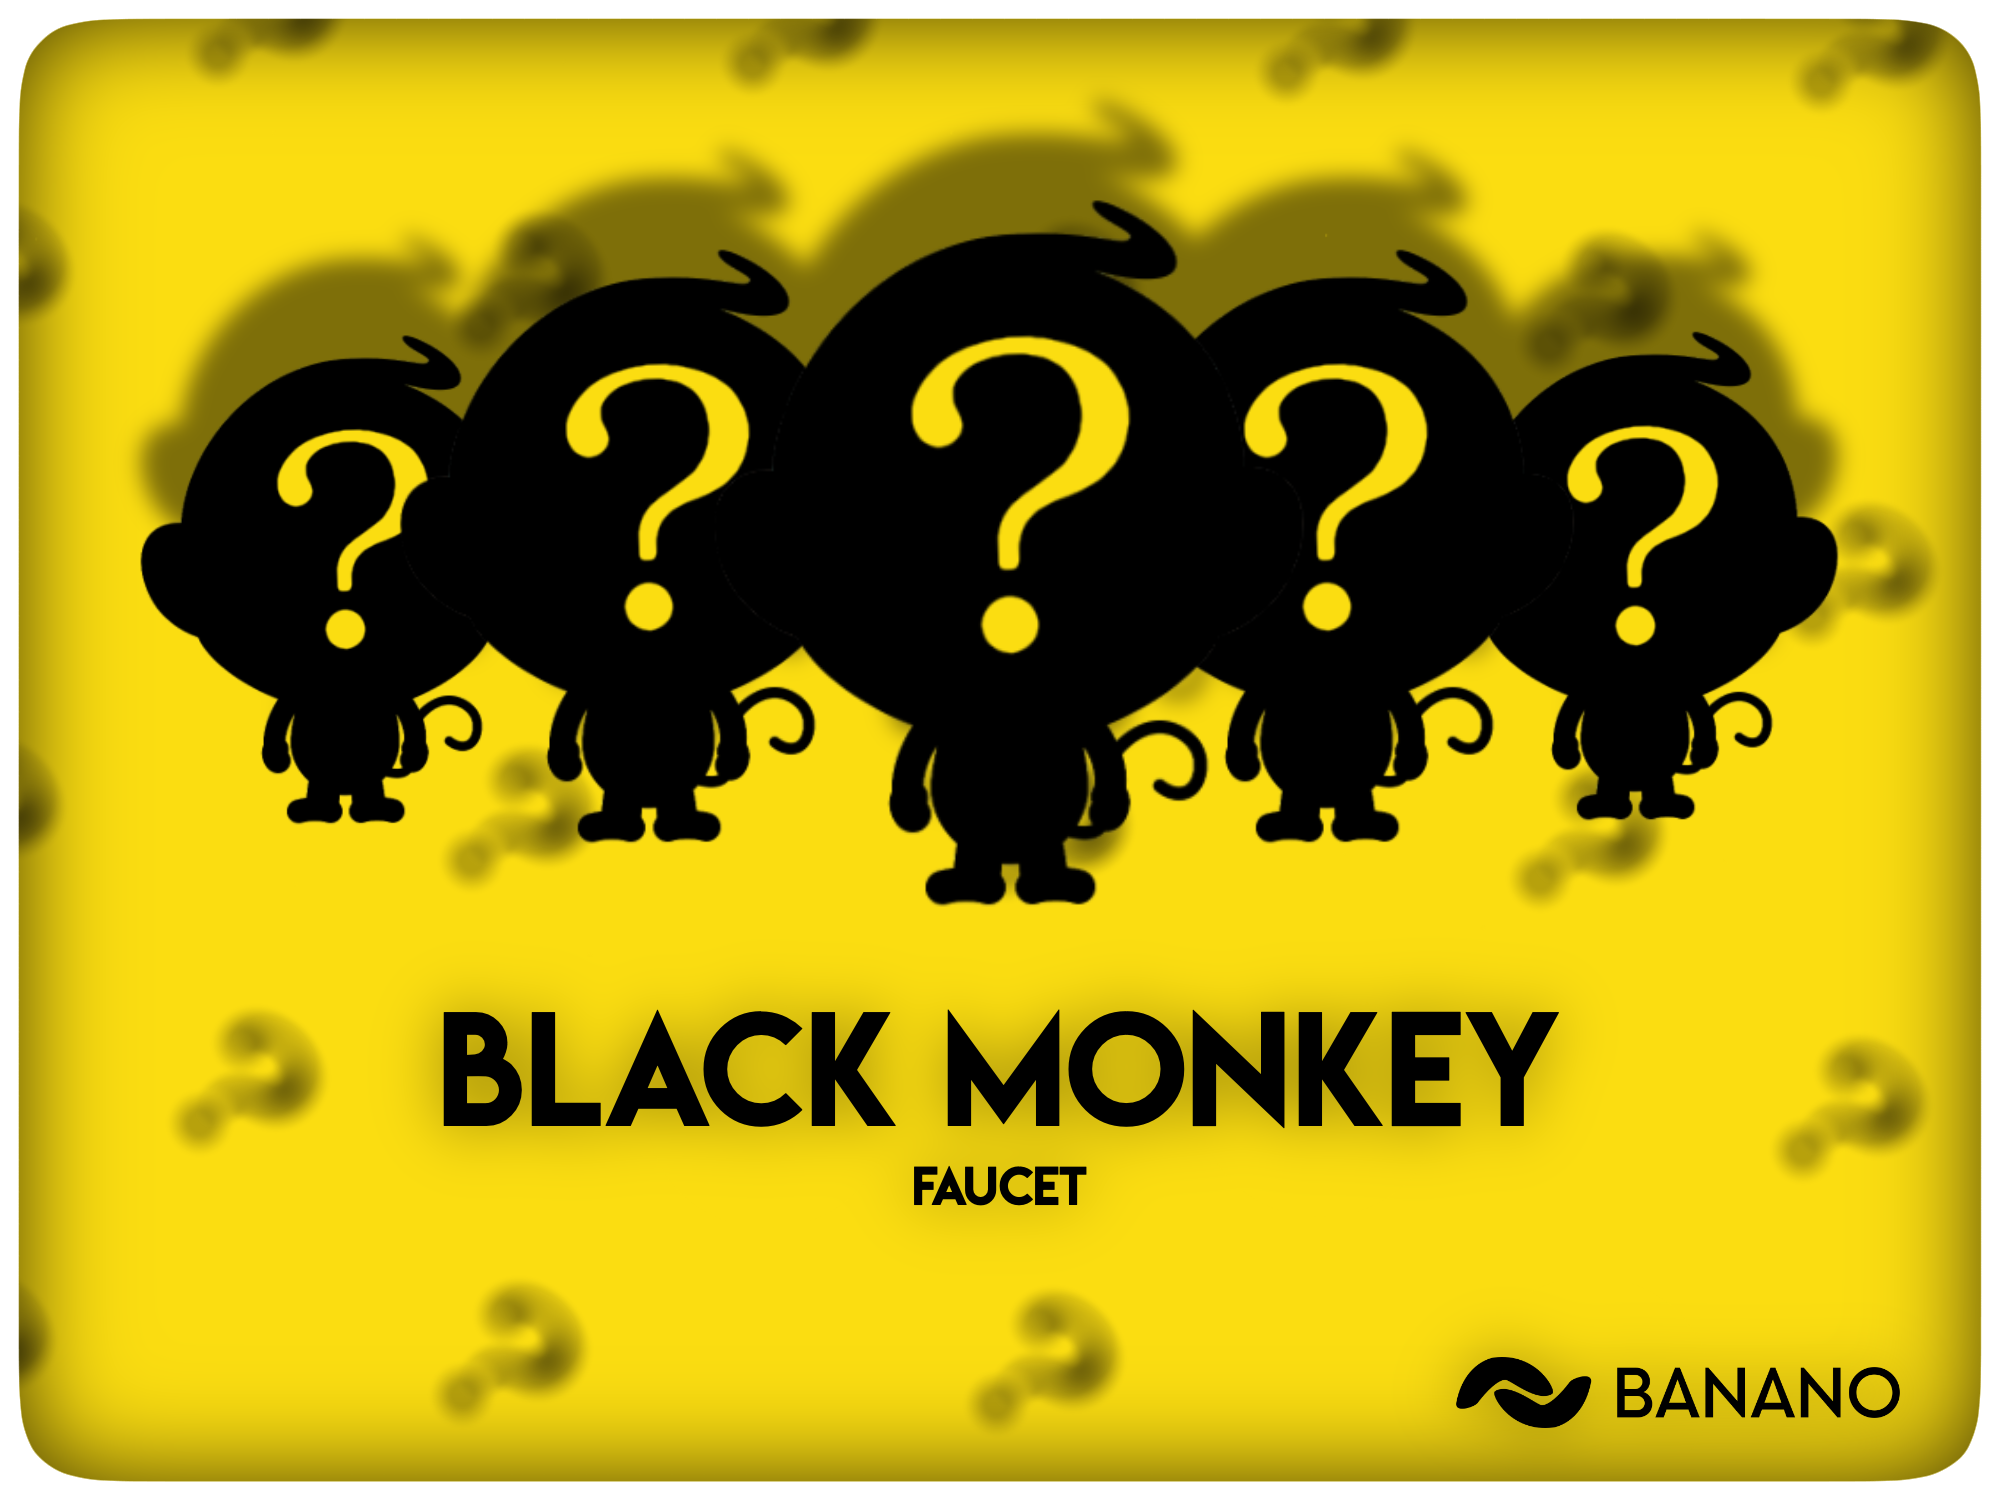 Earn Free BANANO by Playing our Faucet Game ‘Black Monkey’! Round 18 about to start!